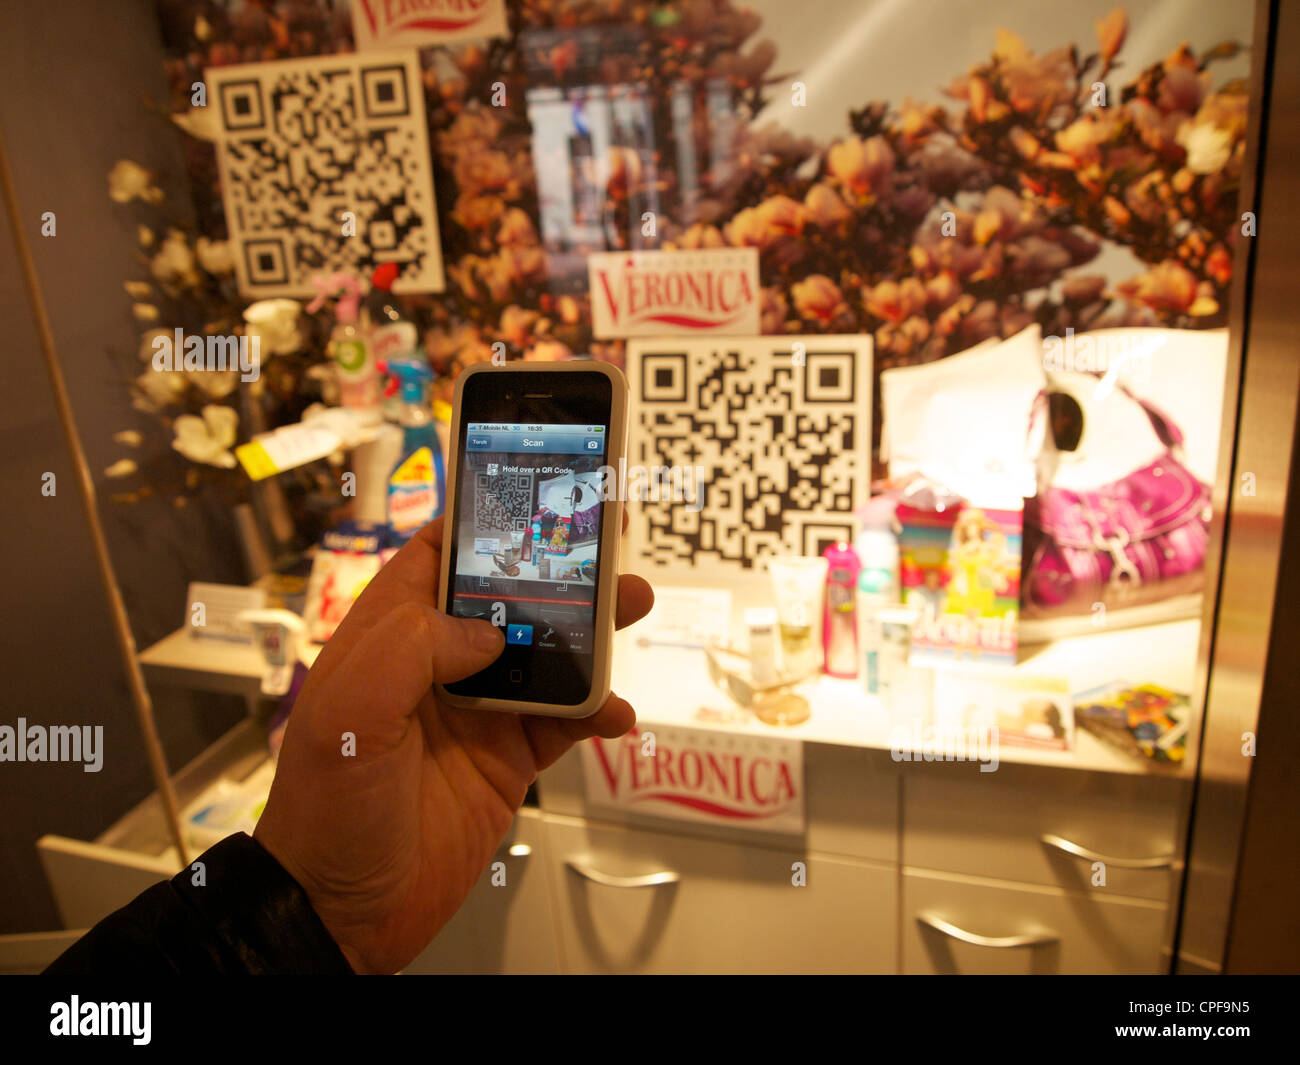 Shopping new style, man scanning qr-code with smartphone of product in shop window, to buy the product and have it shipped home. Stock Photo